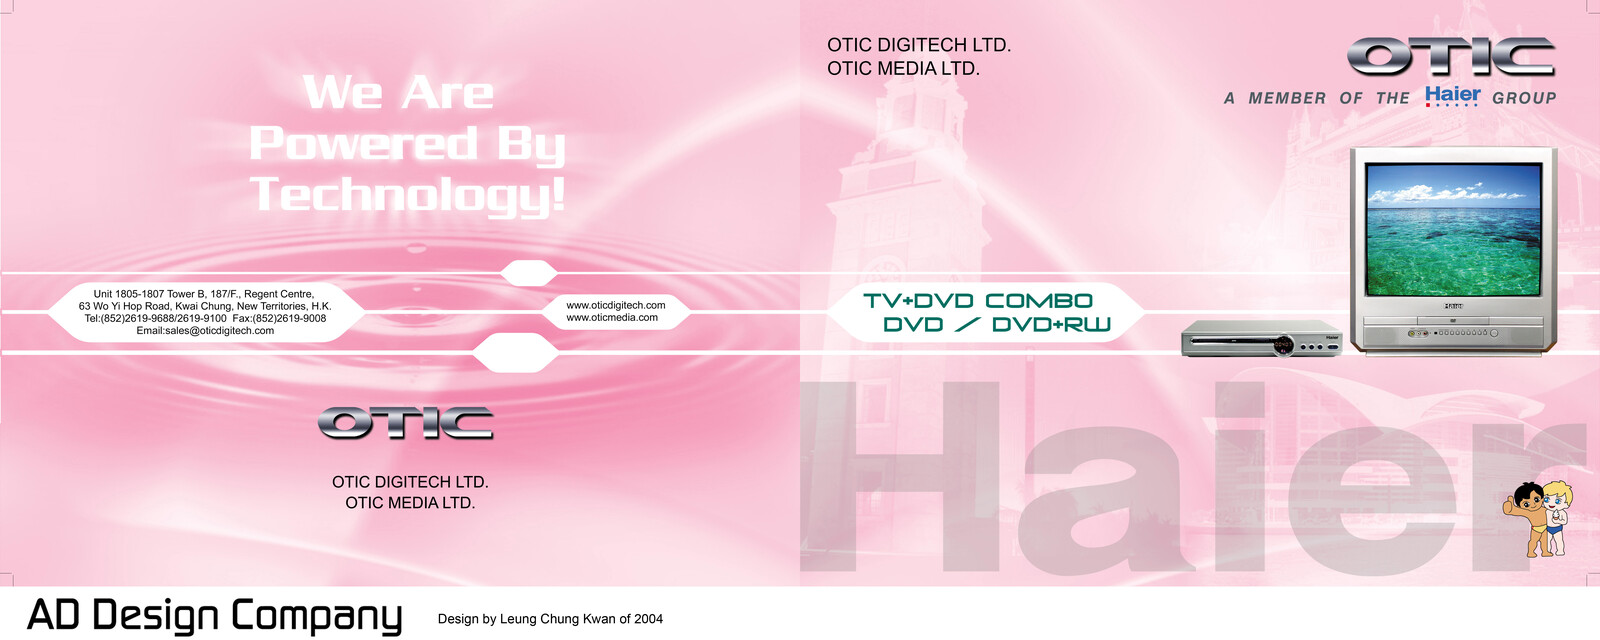 💎 Booklet Catalogue Cover | Design by Leung Chung Kwan on 2004 💎
Brand Name︰Haier / OTIC | Client︰OTIC Limited